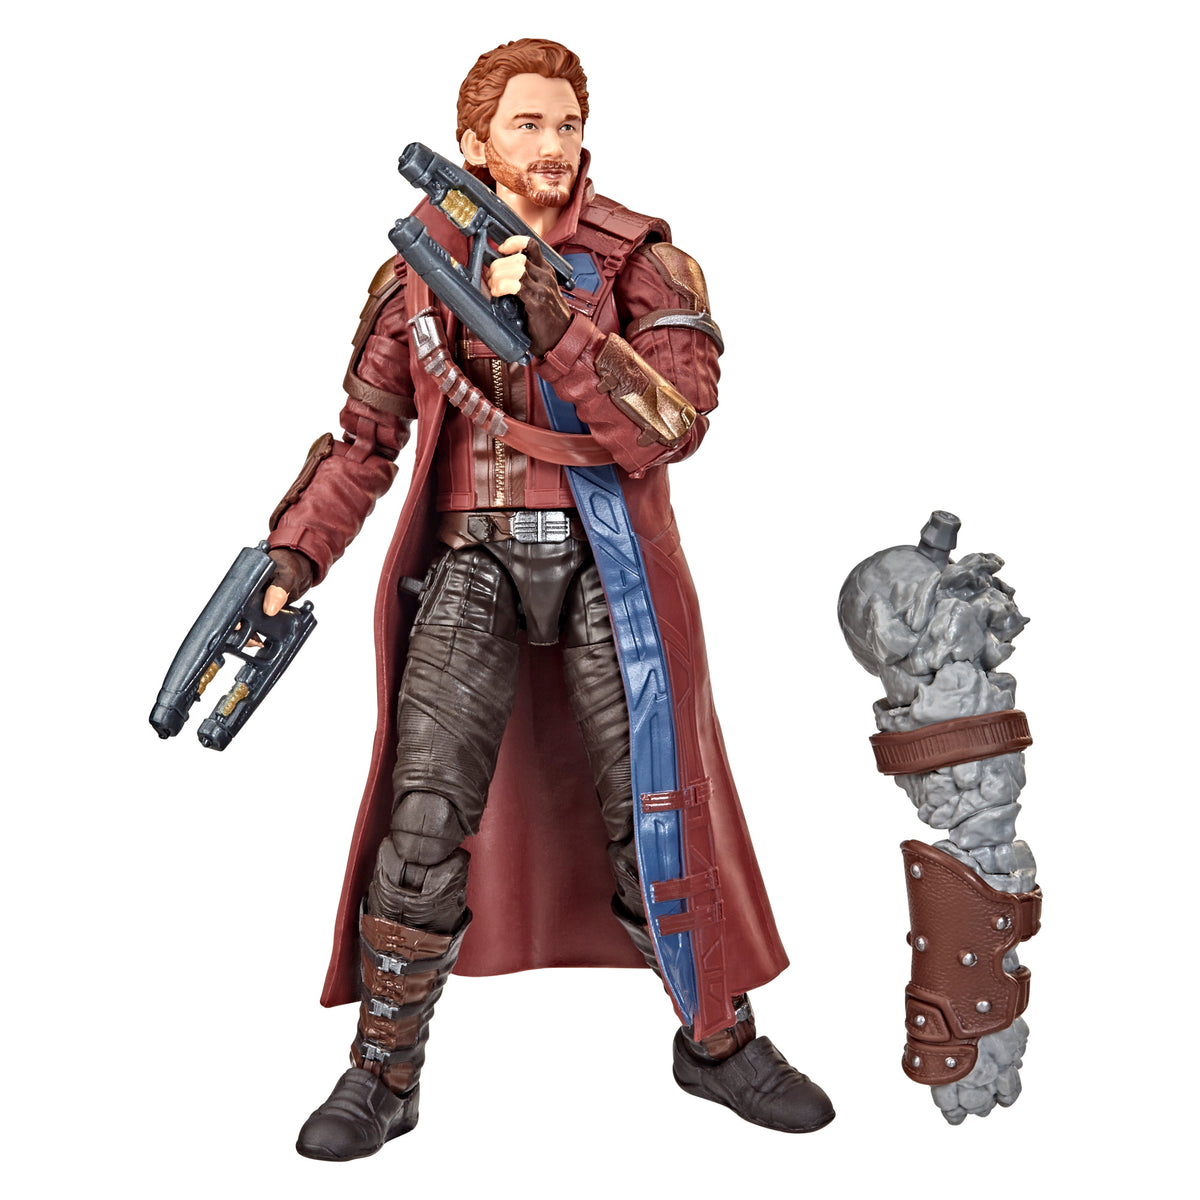 Marvel Legends What If? T'Challa Star-Lord 6-Inch Action Figure – State of  Comics